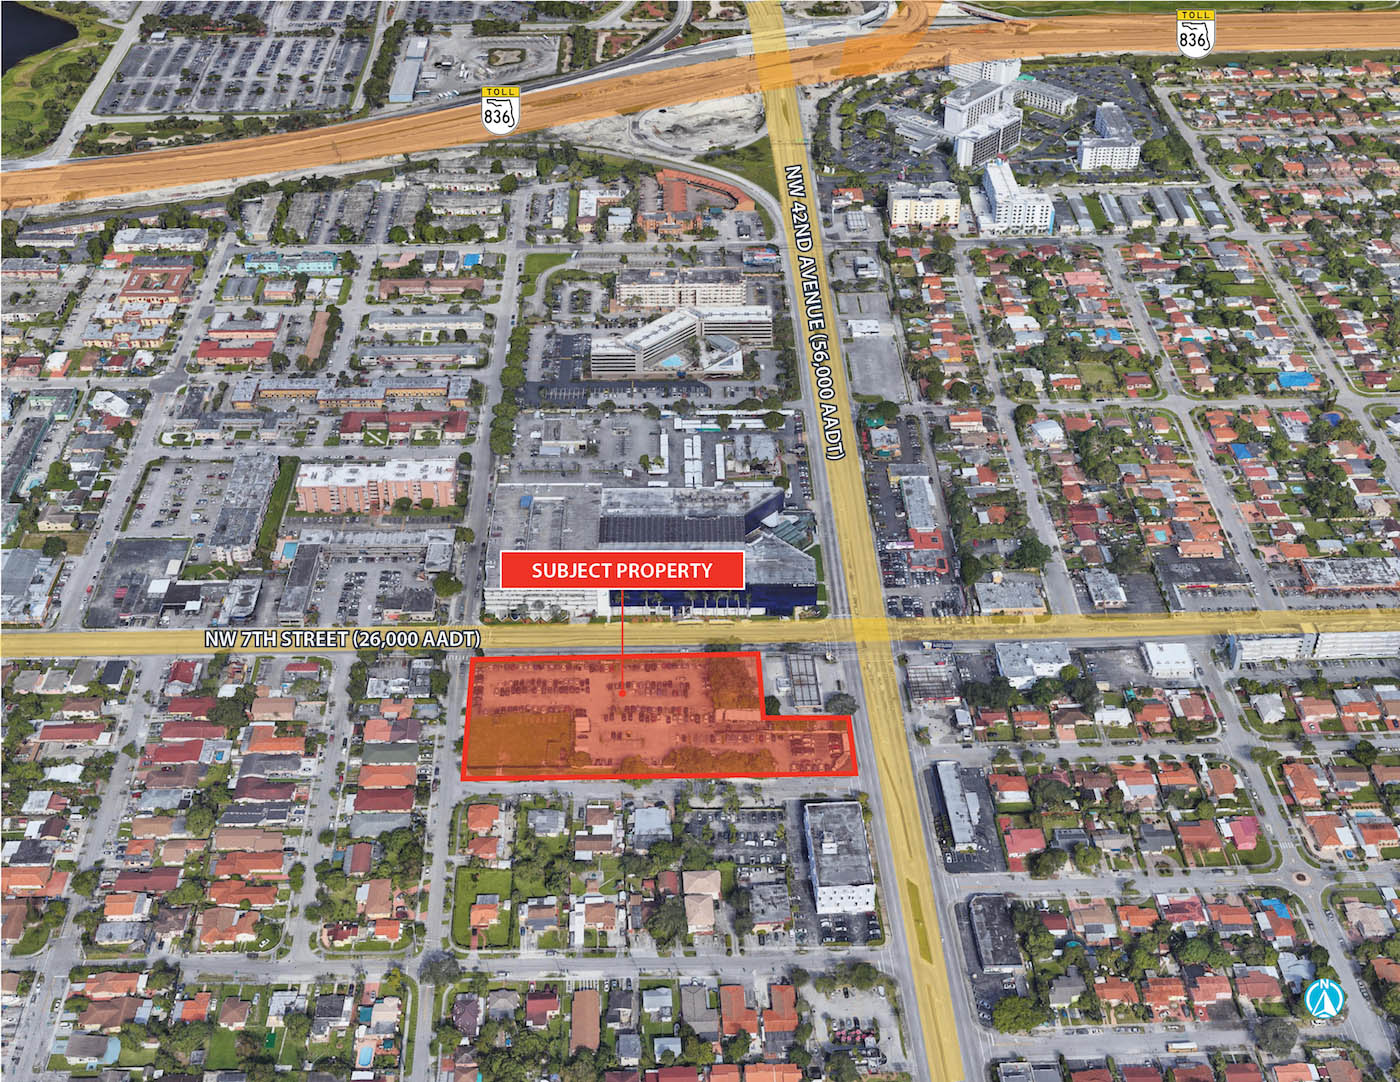 Avison Young to sell ±2.79-acre site for substantial mixed-use development along Miami’s Le Jeune Corridor